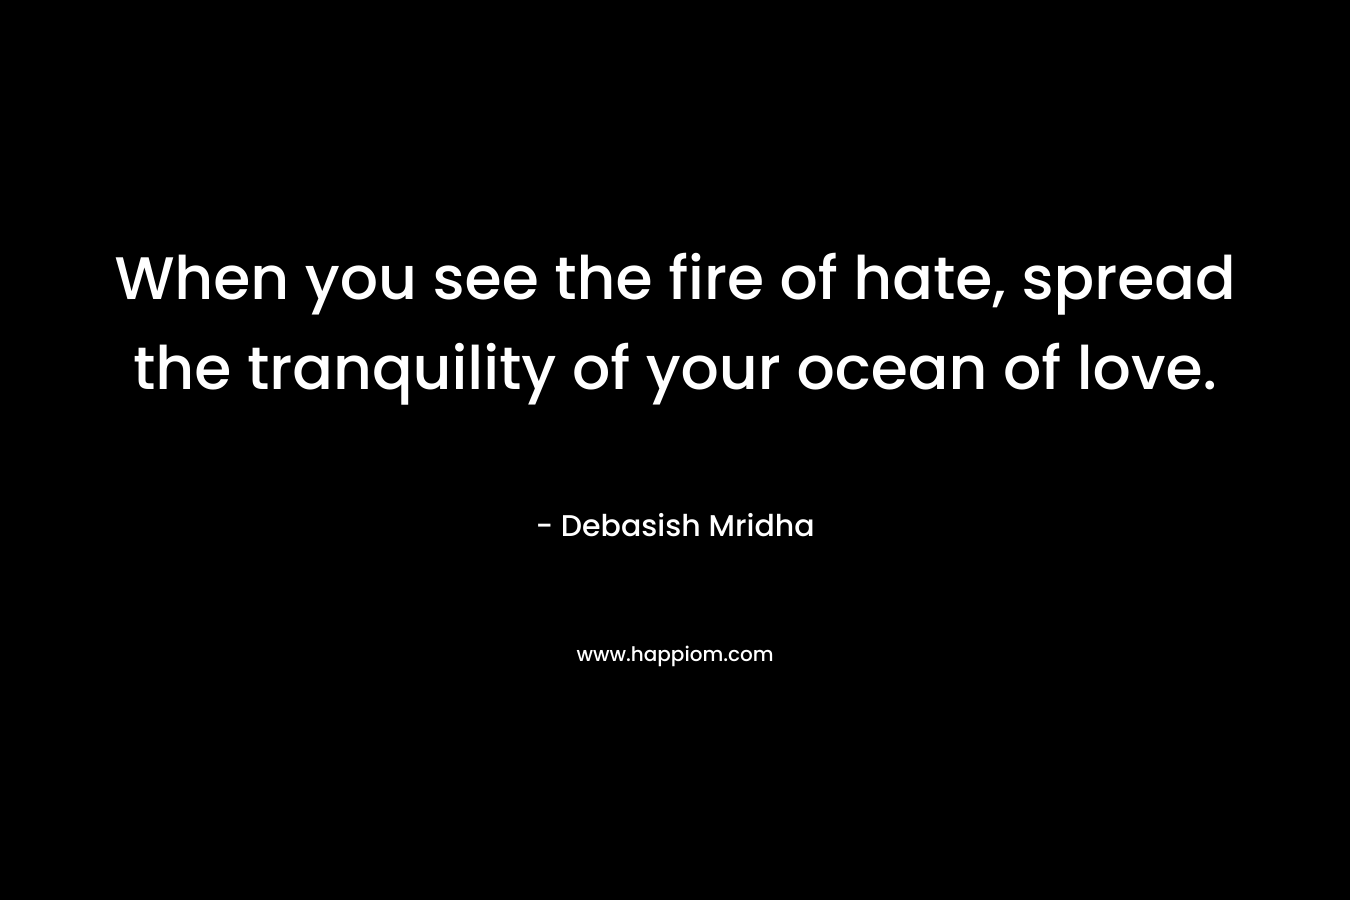 When you see the fire of hate, spread the tranquility of your ocean of love.